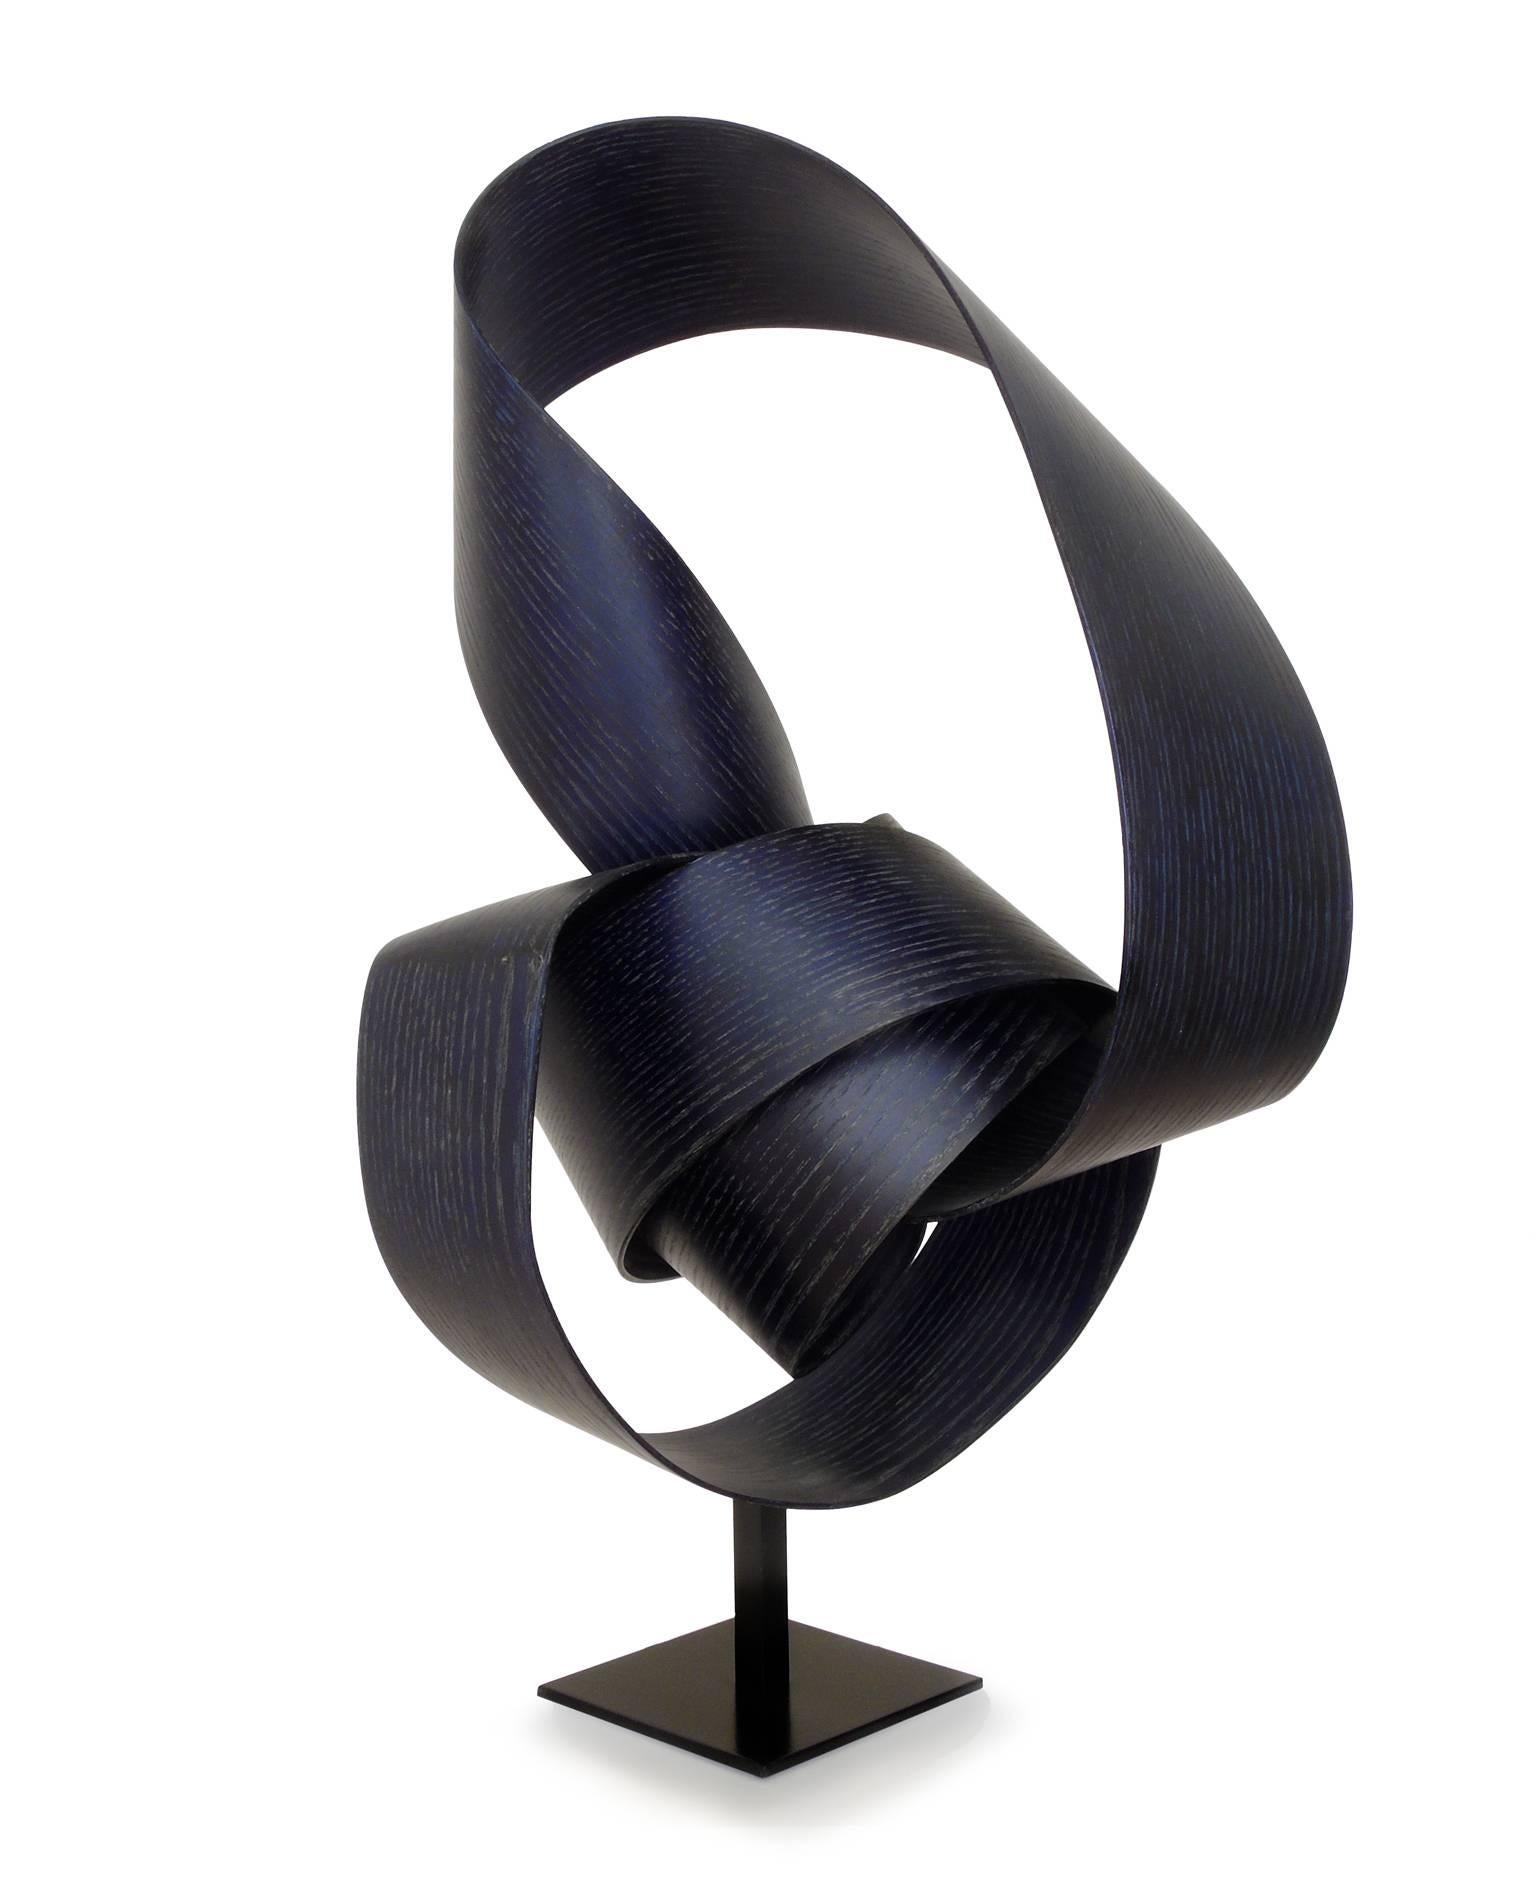 Atmosphere #223 - Brown Abstract Sculpture by Jeremy Holmes